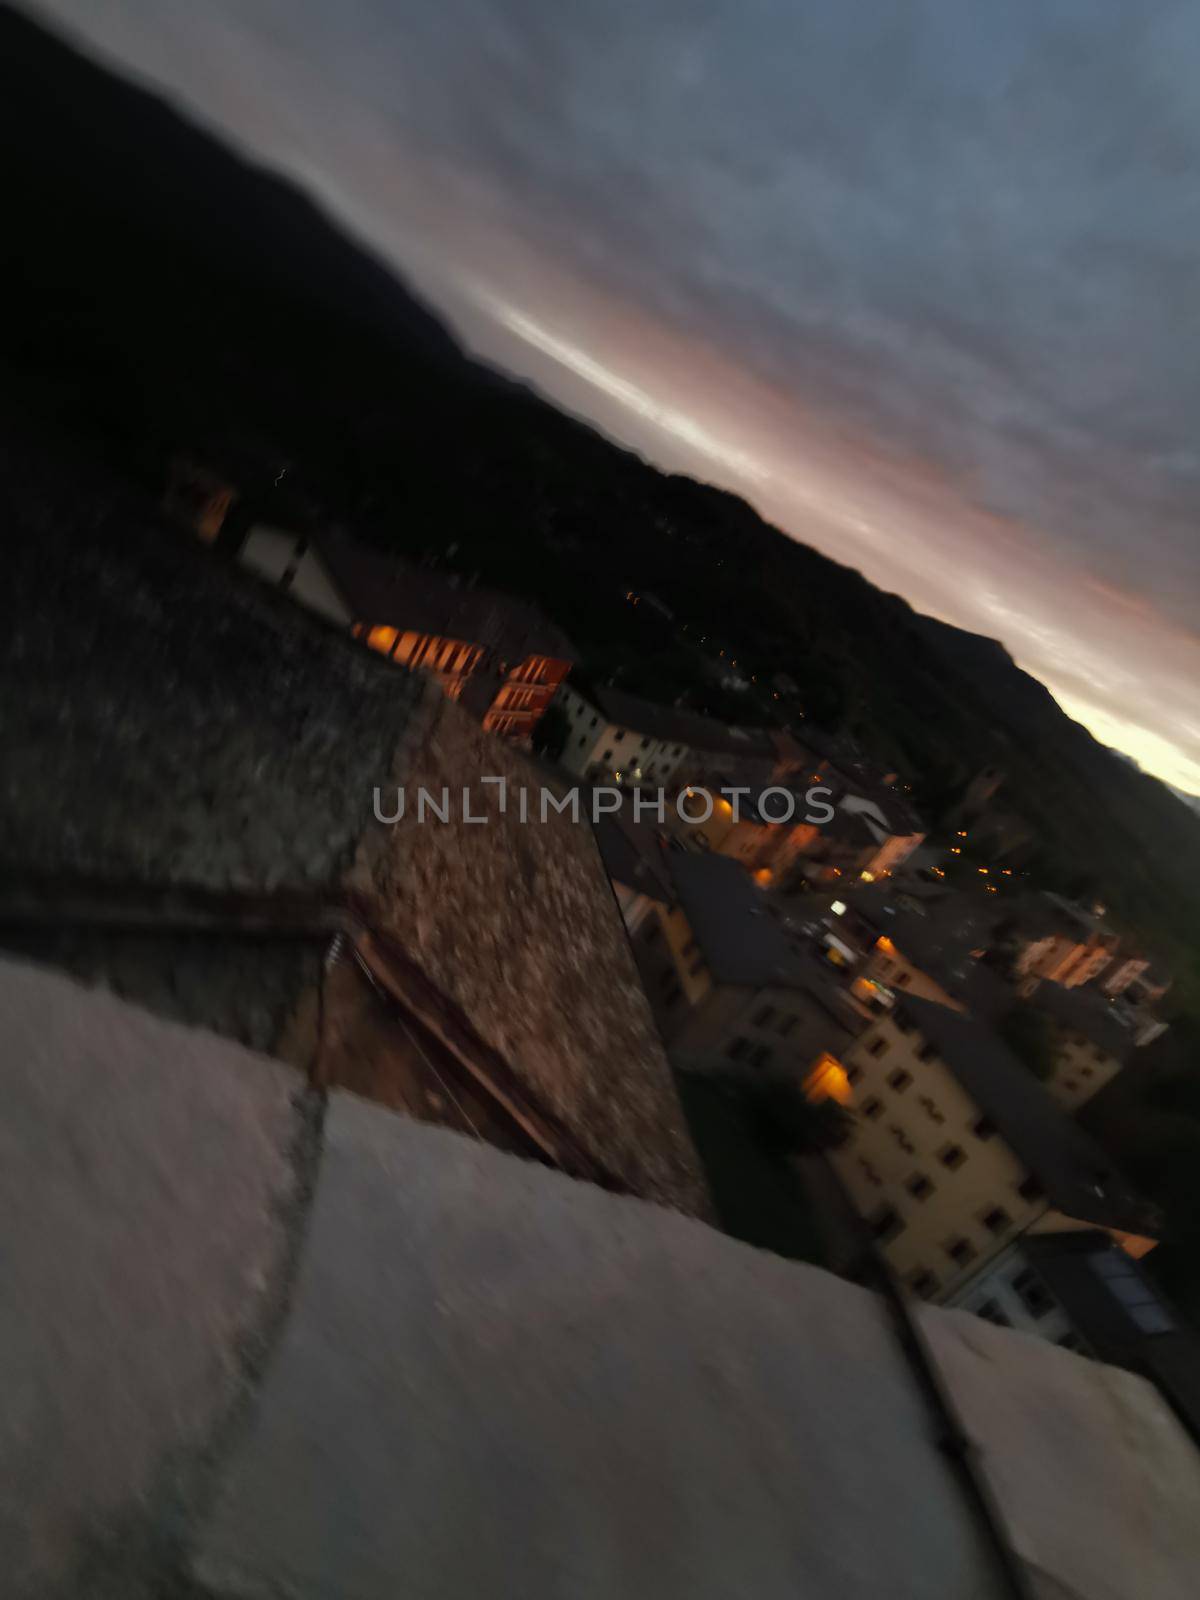 panorama of the sunset from the castle of MonteFiorino Modena on the hills. High quality photo